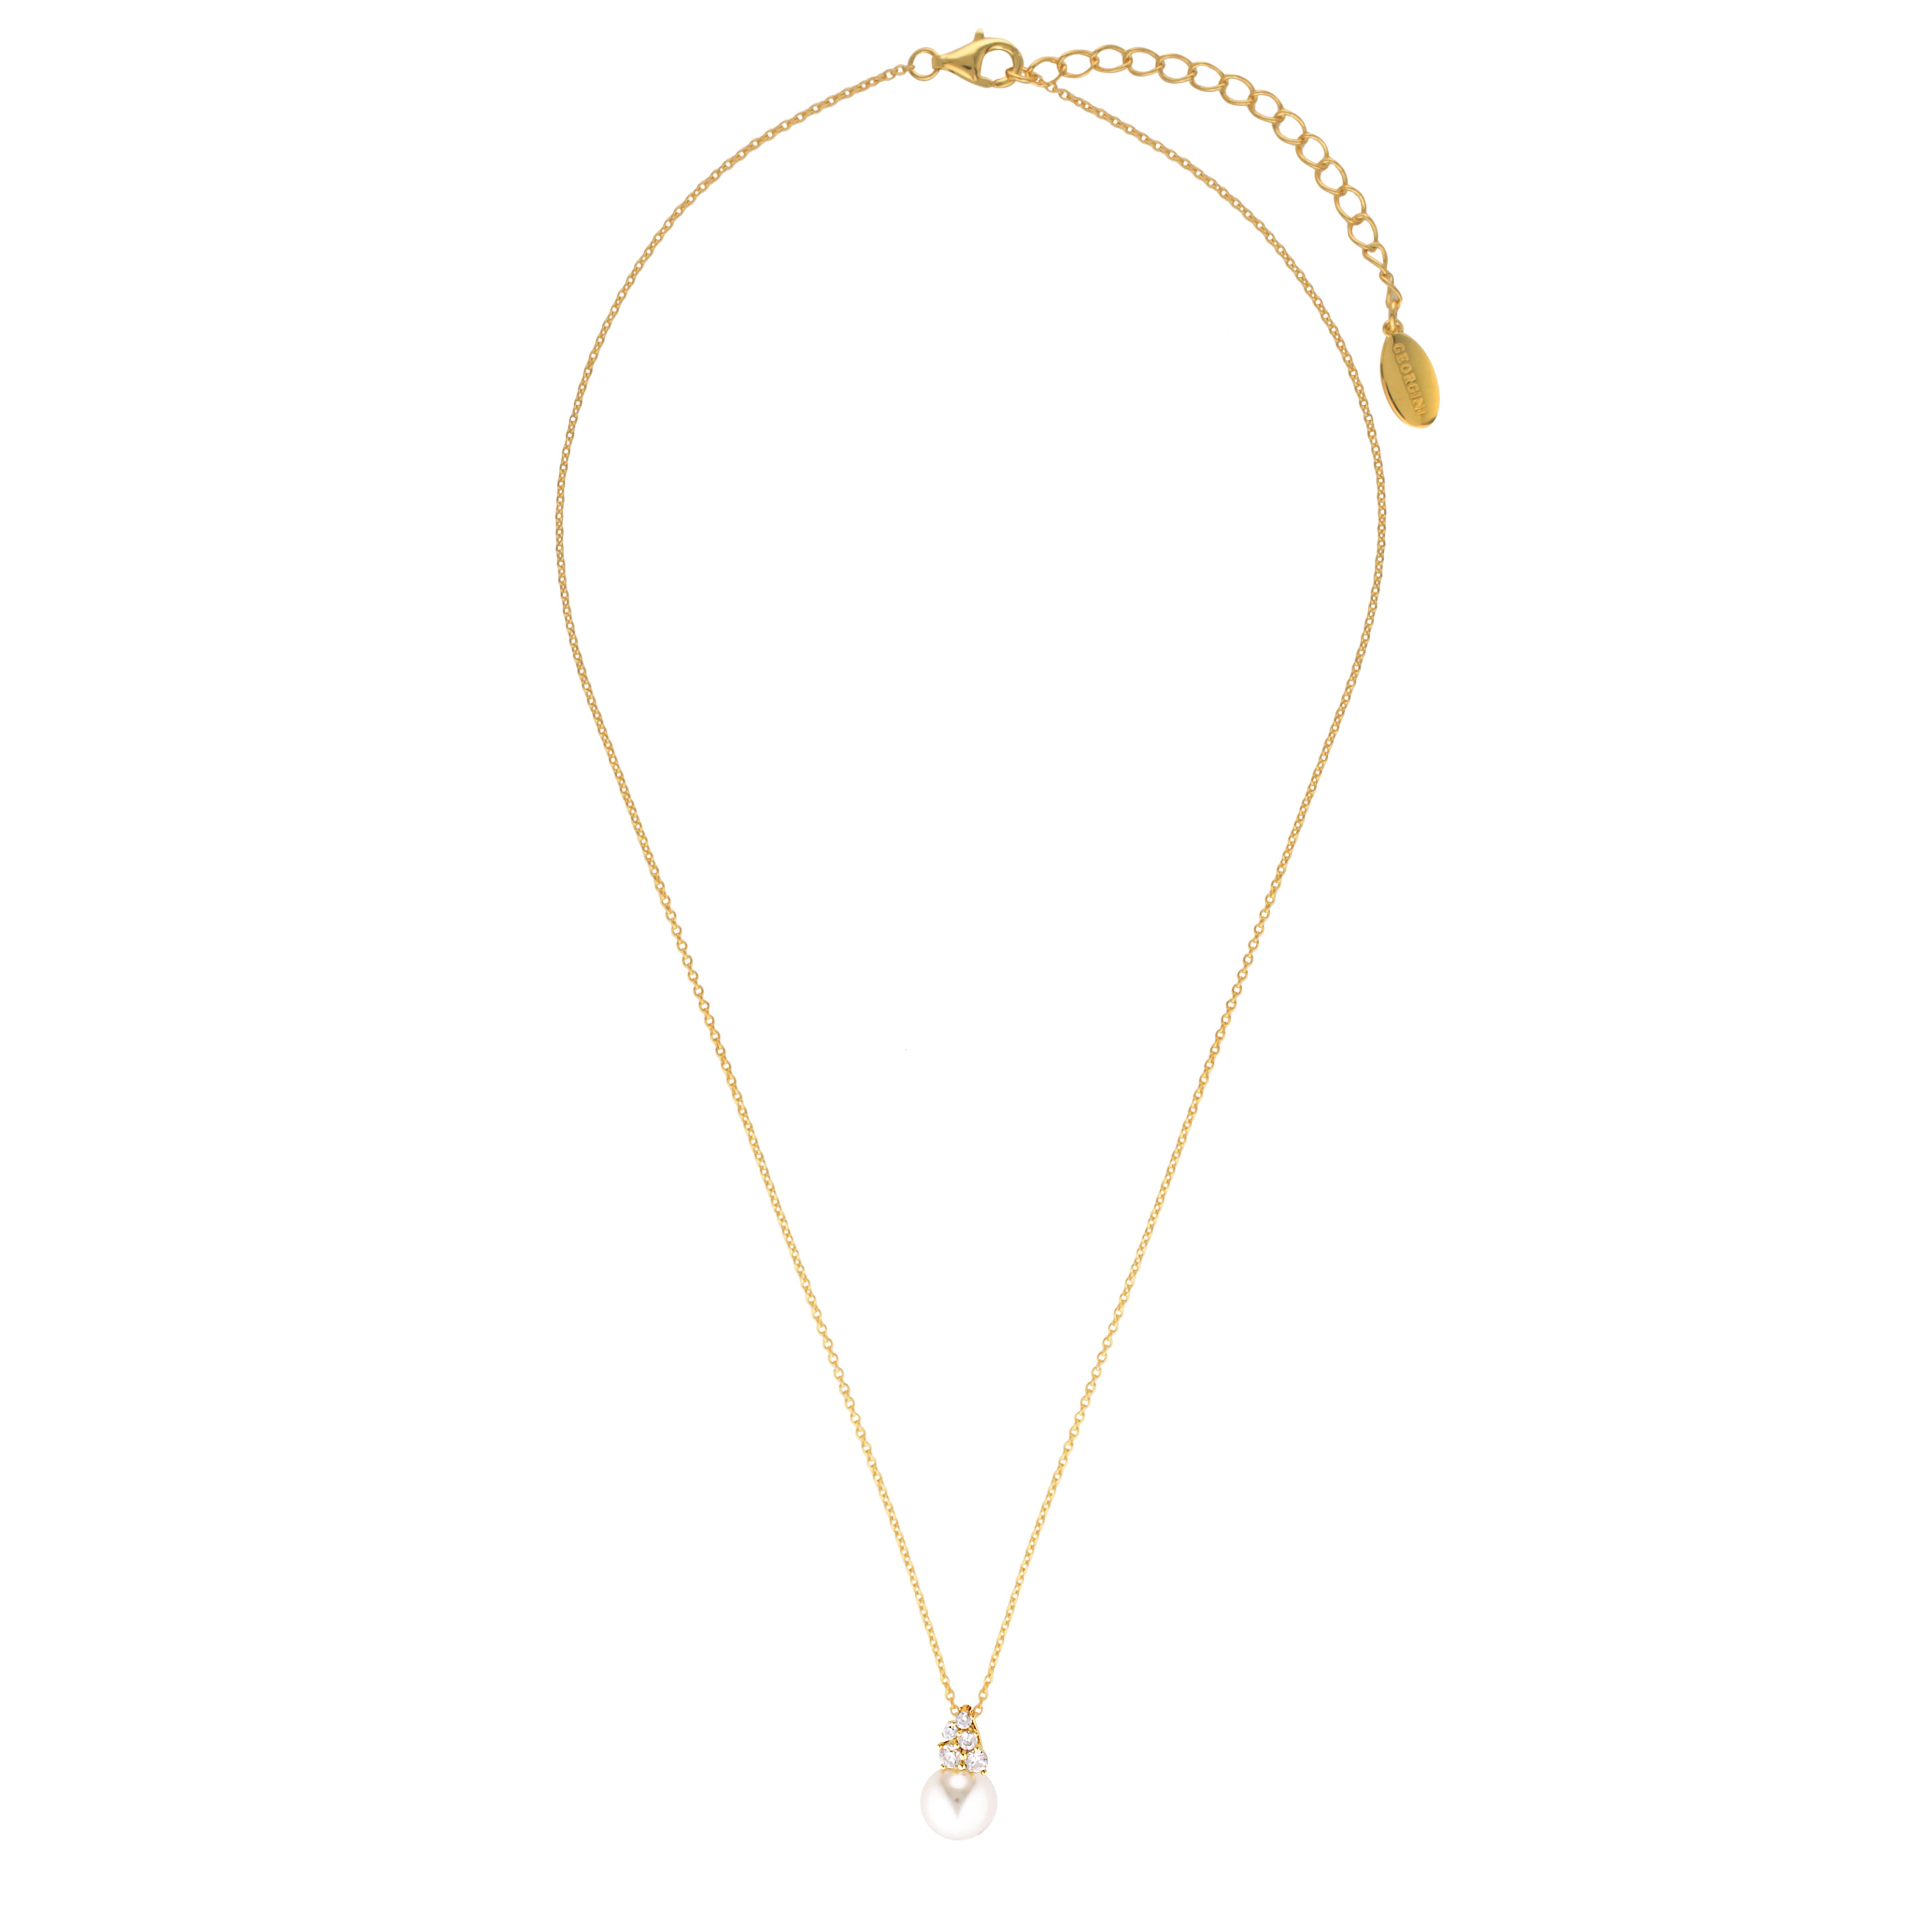 RED CARPET GOVENORS NECKLACE GOLD